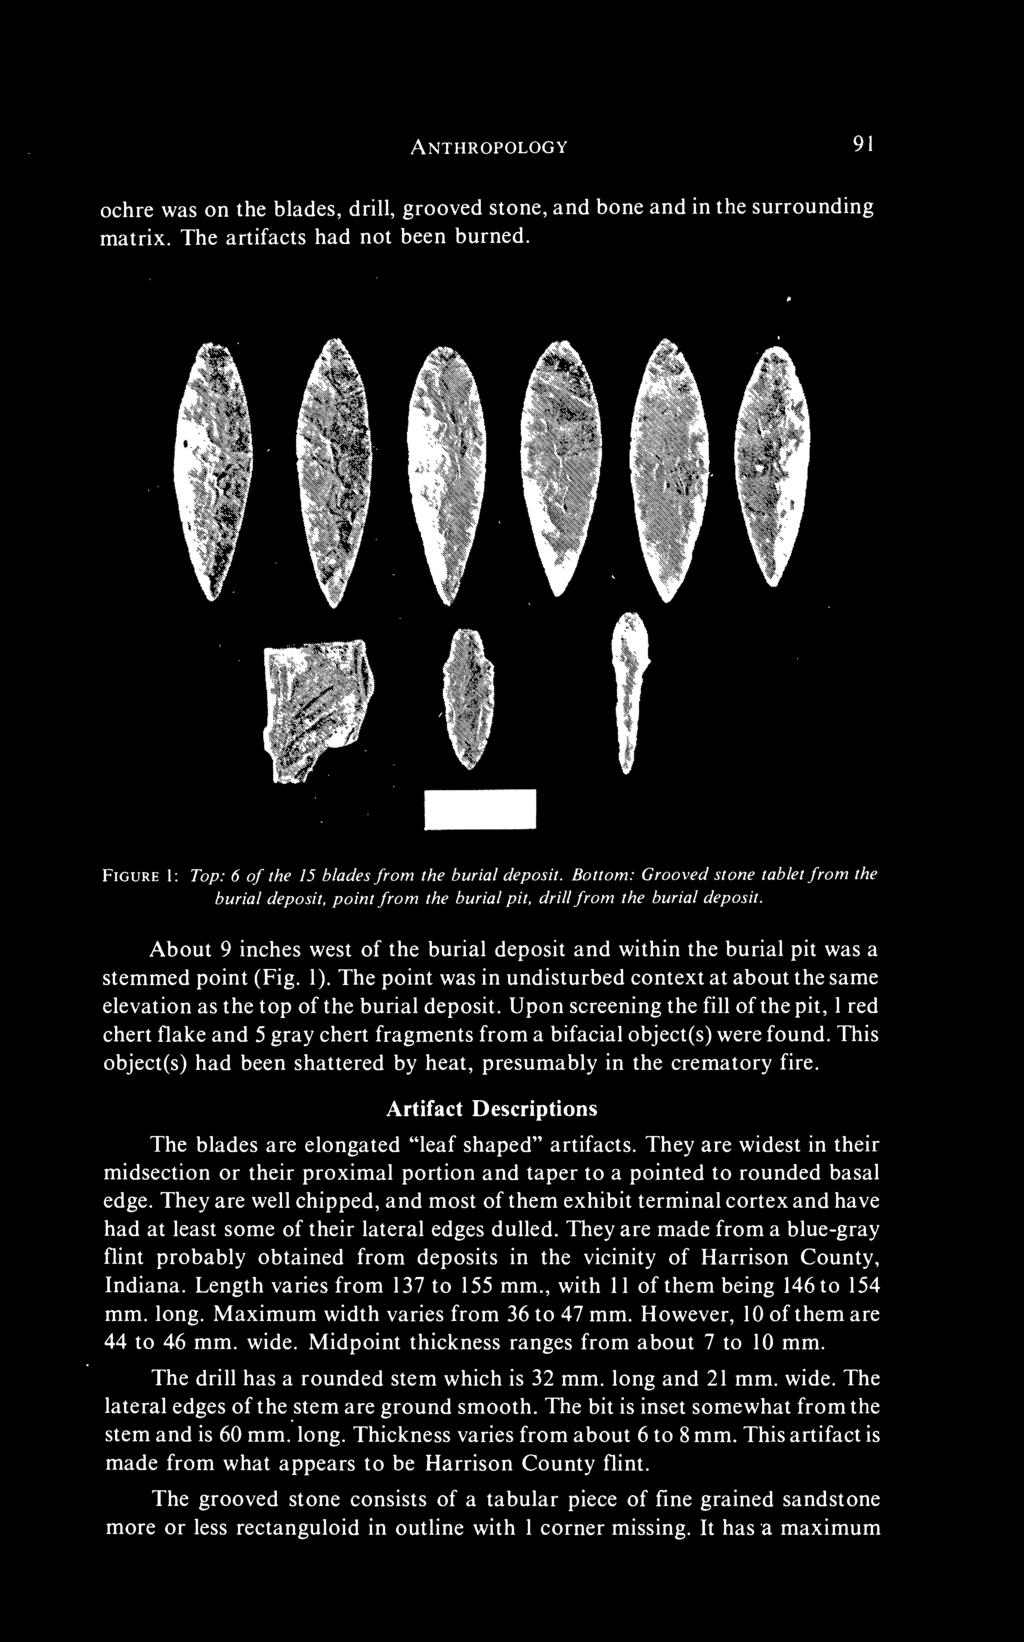 Artifact Descriptions The blades are elongated "leaf shaped" artifacts. They are widest in their midsection or their proximal portion and taper to a pointed to rounded basal edge.